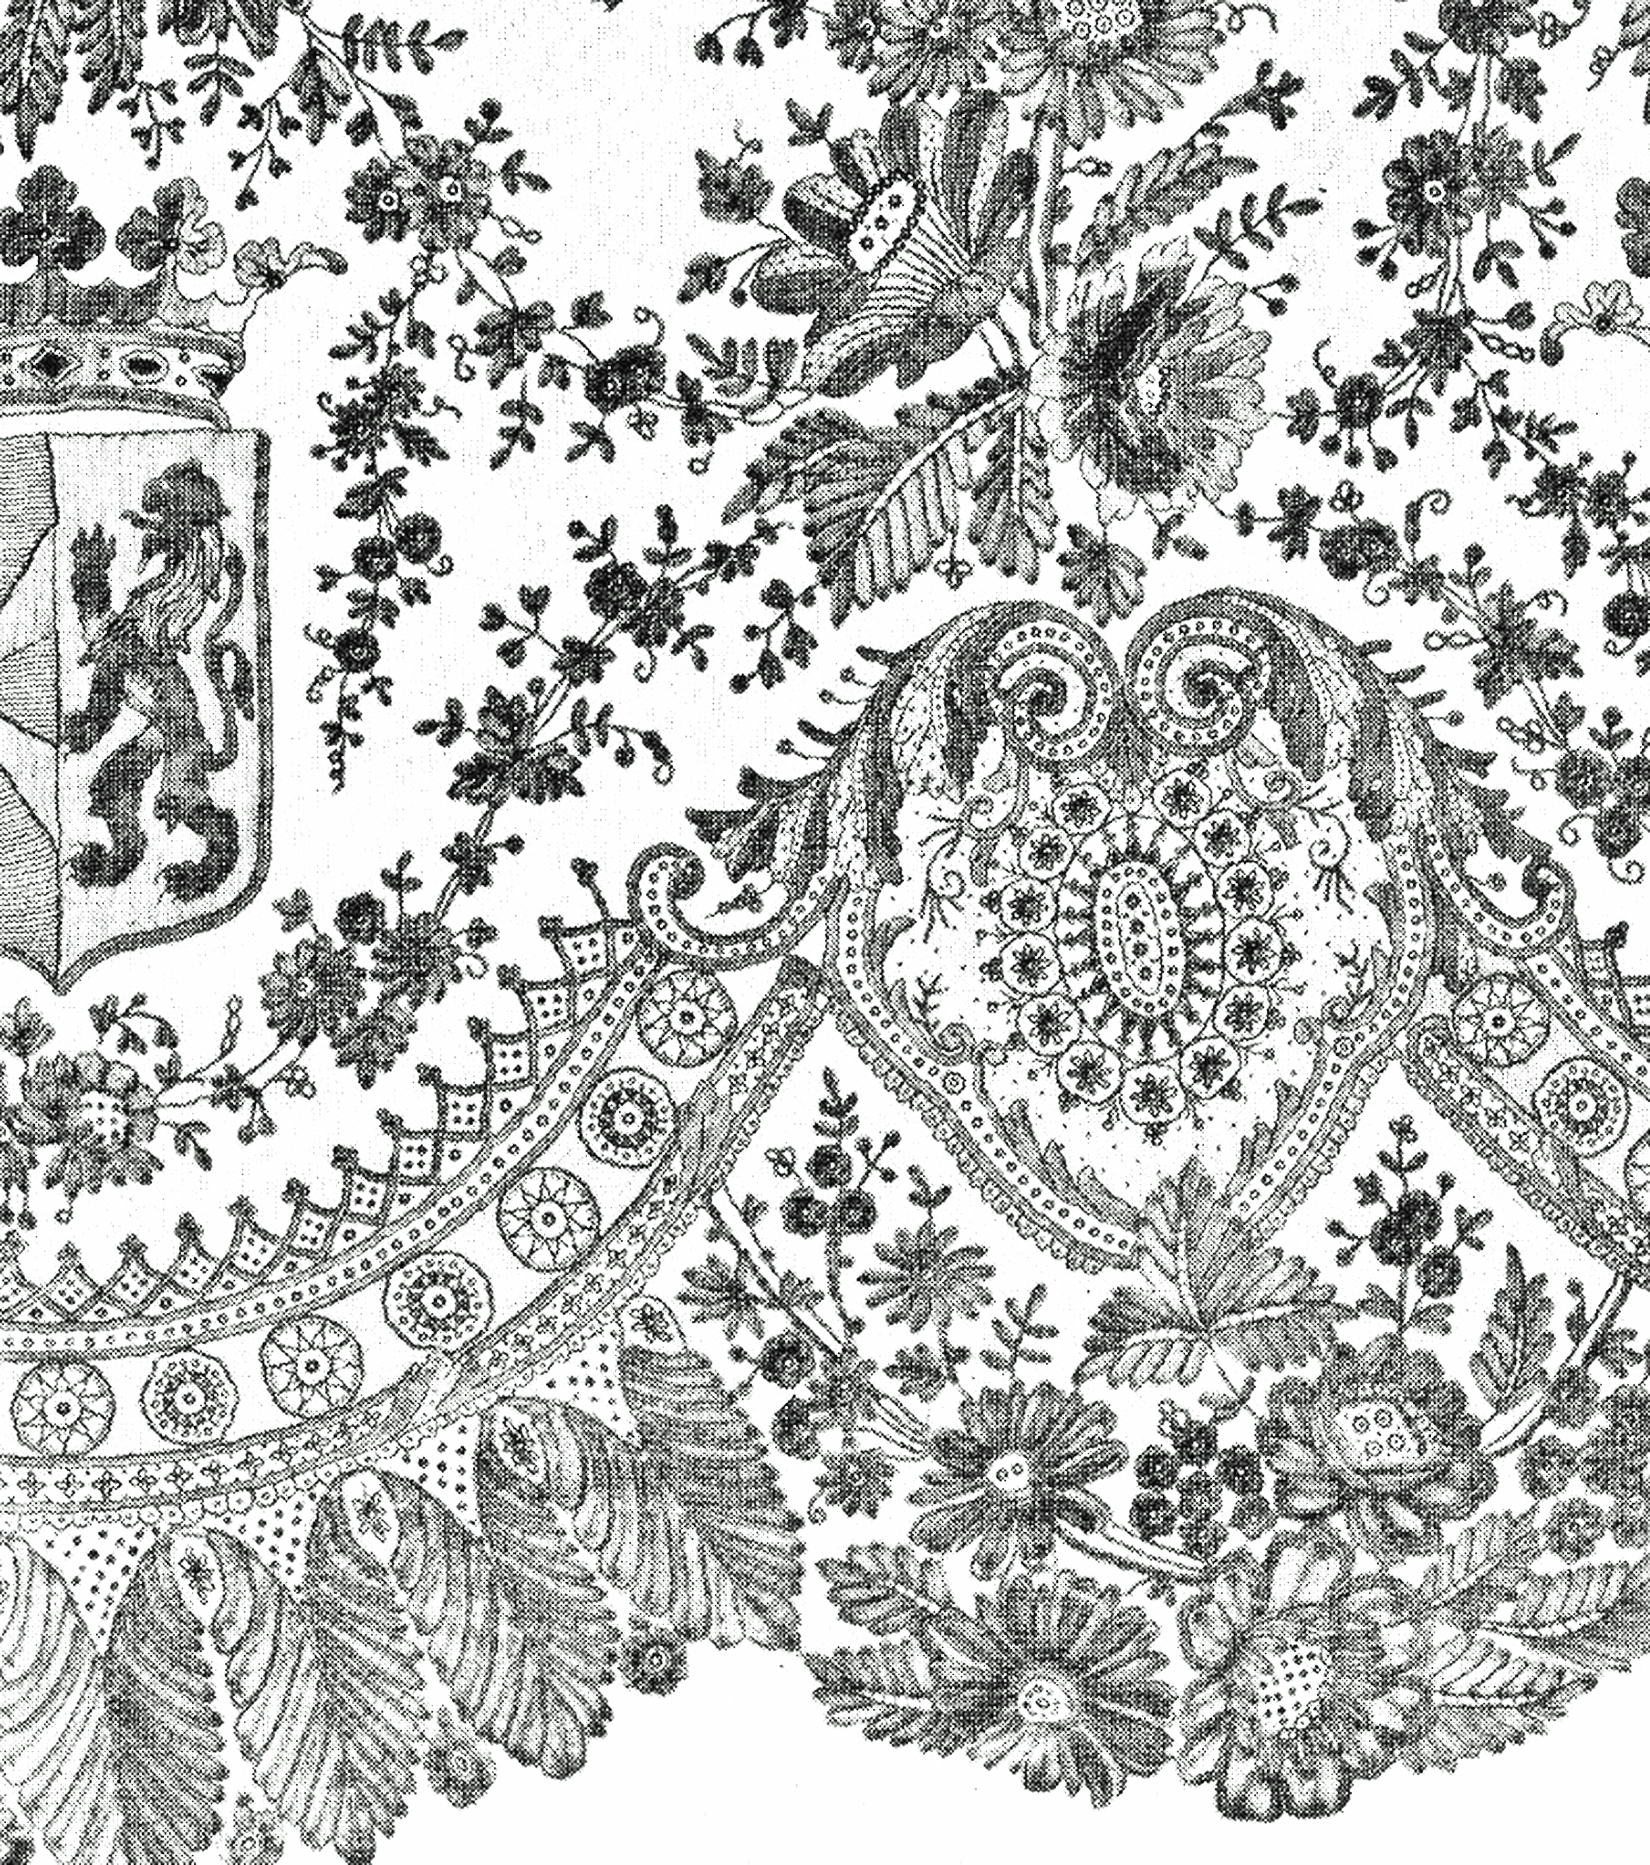 These are public domain images of waaay old antique lace Ive